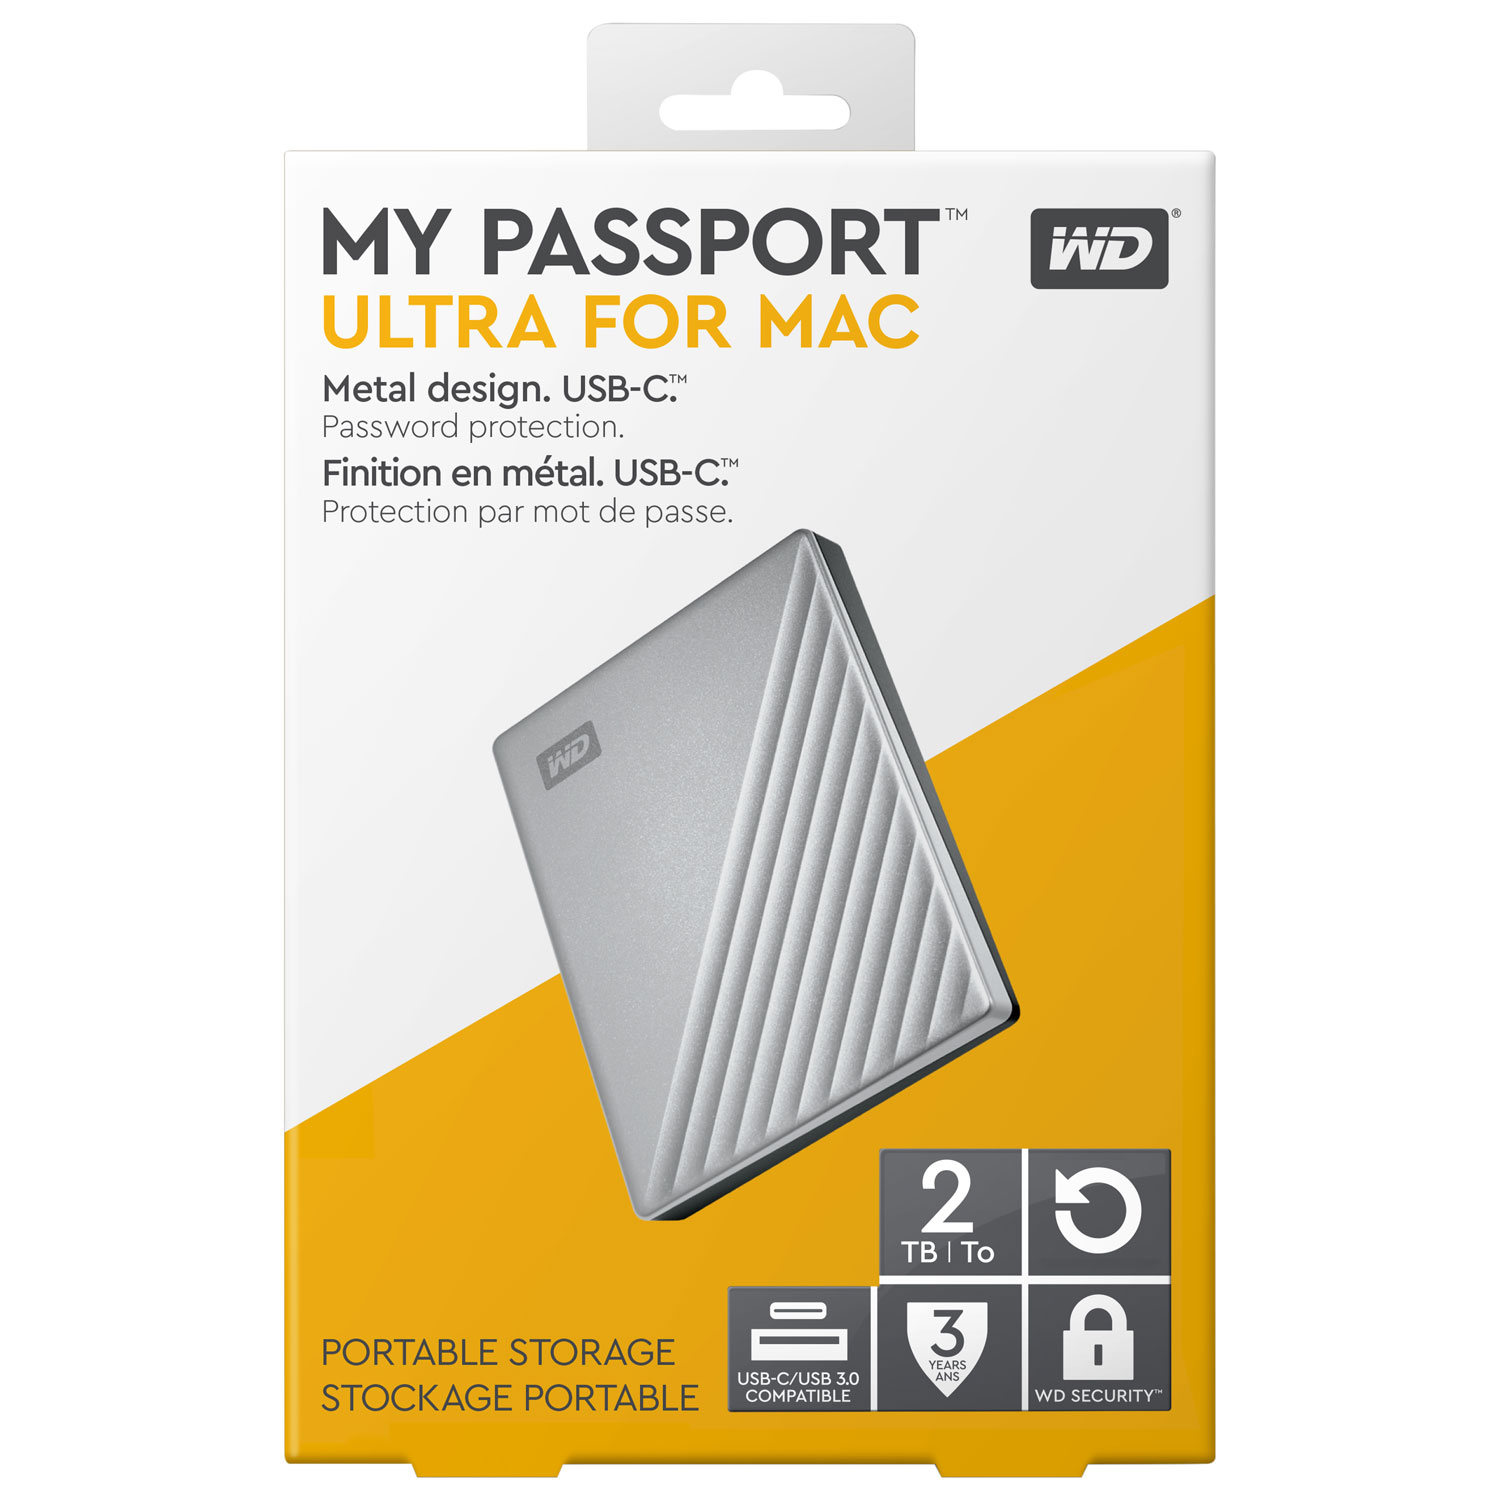 how to restore wd my passport ultra for mac